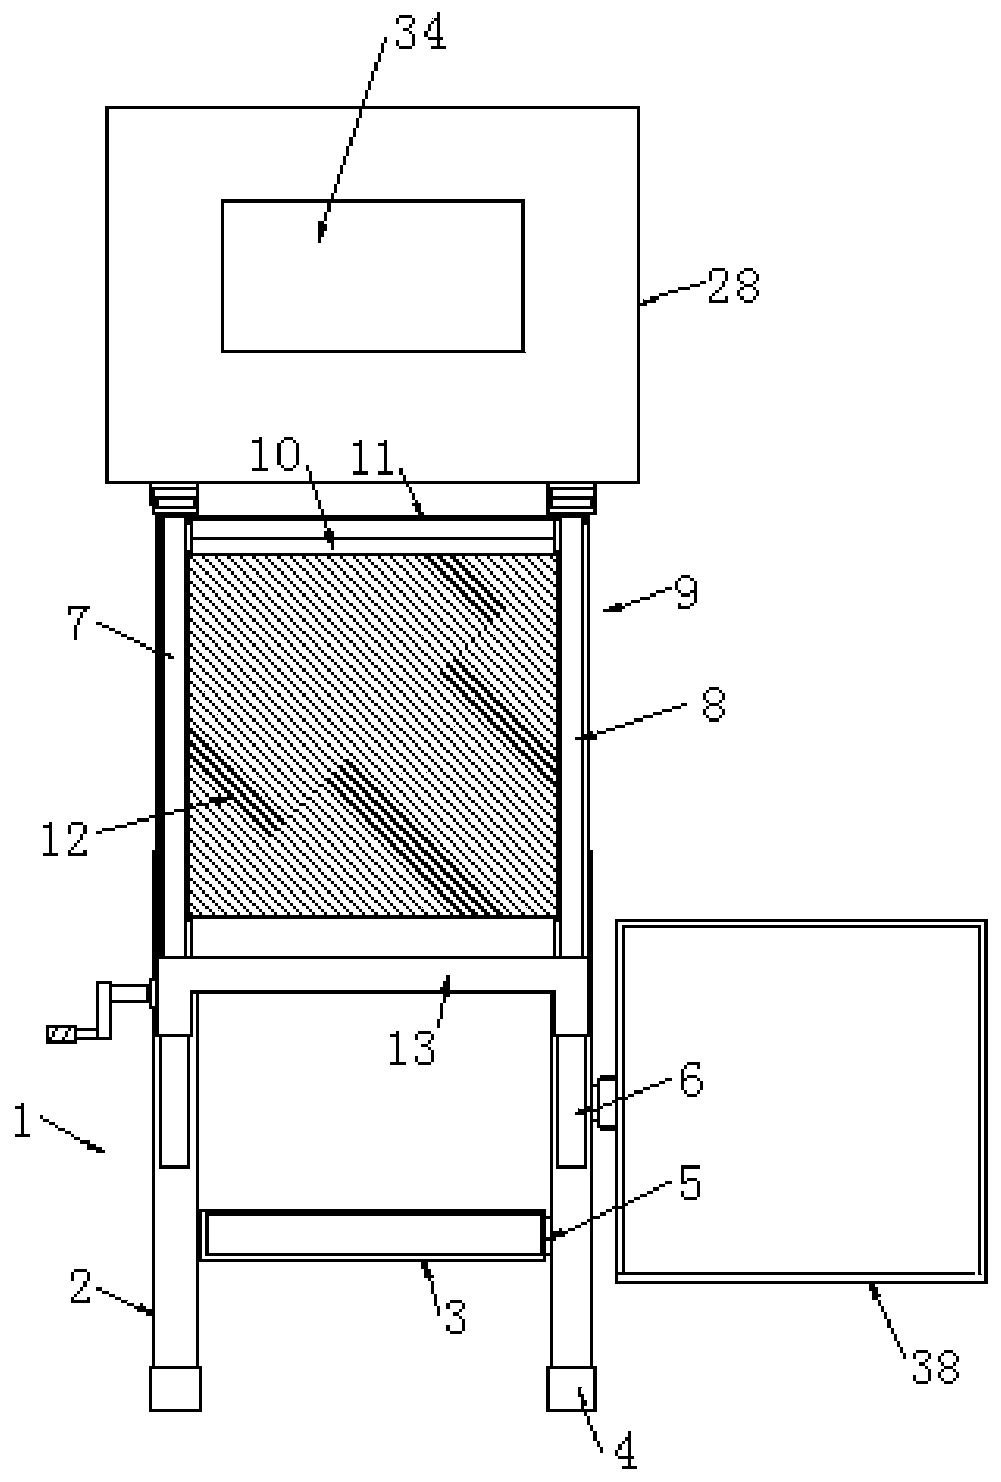 A document display device